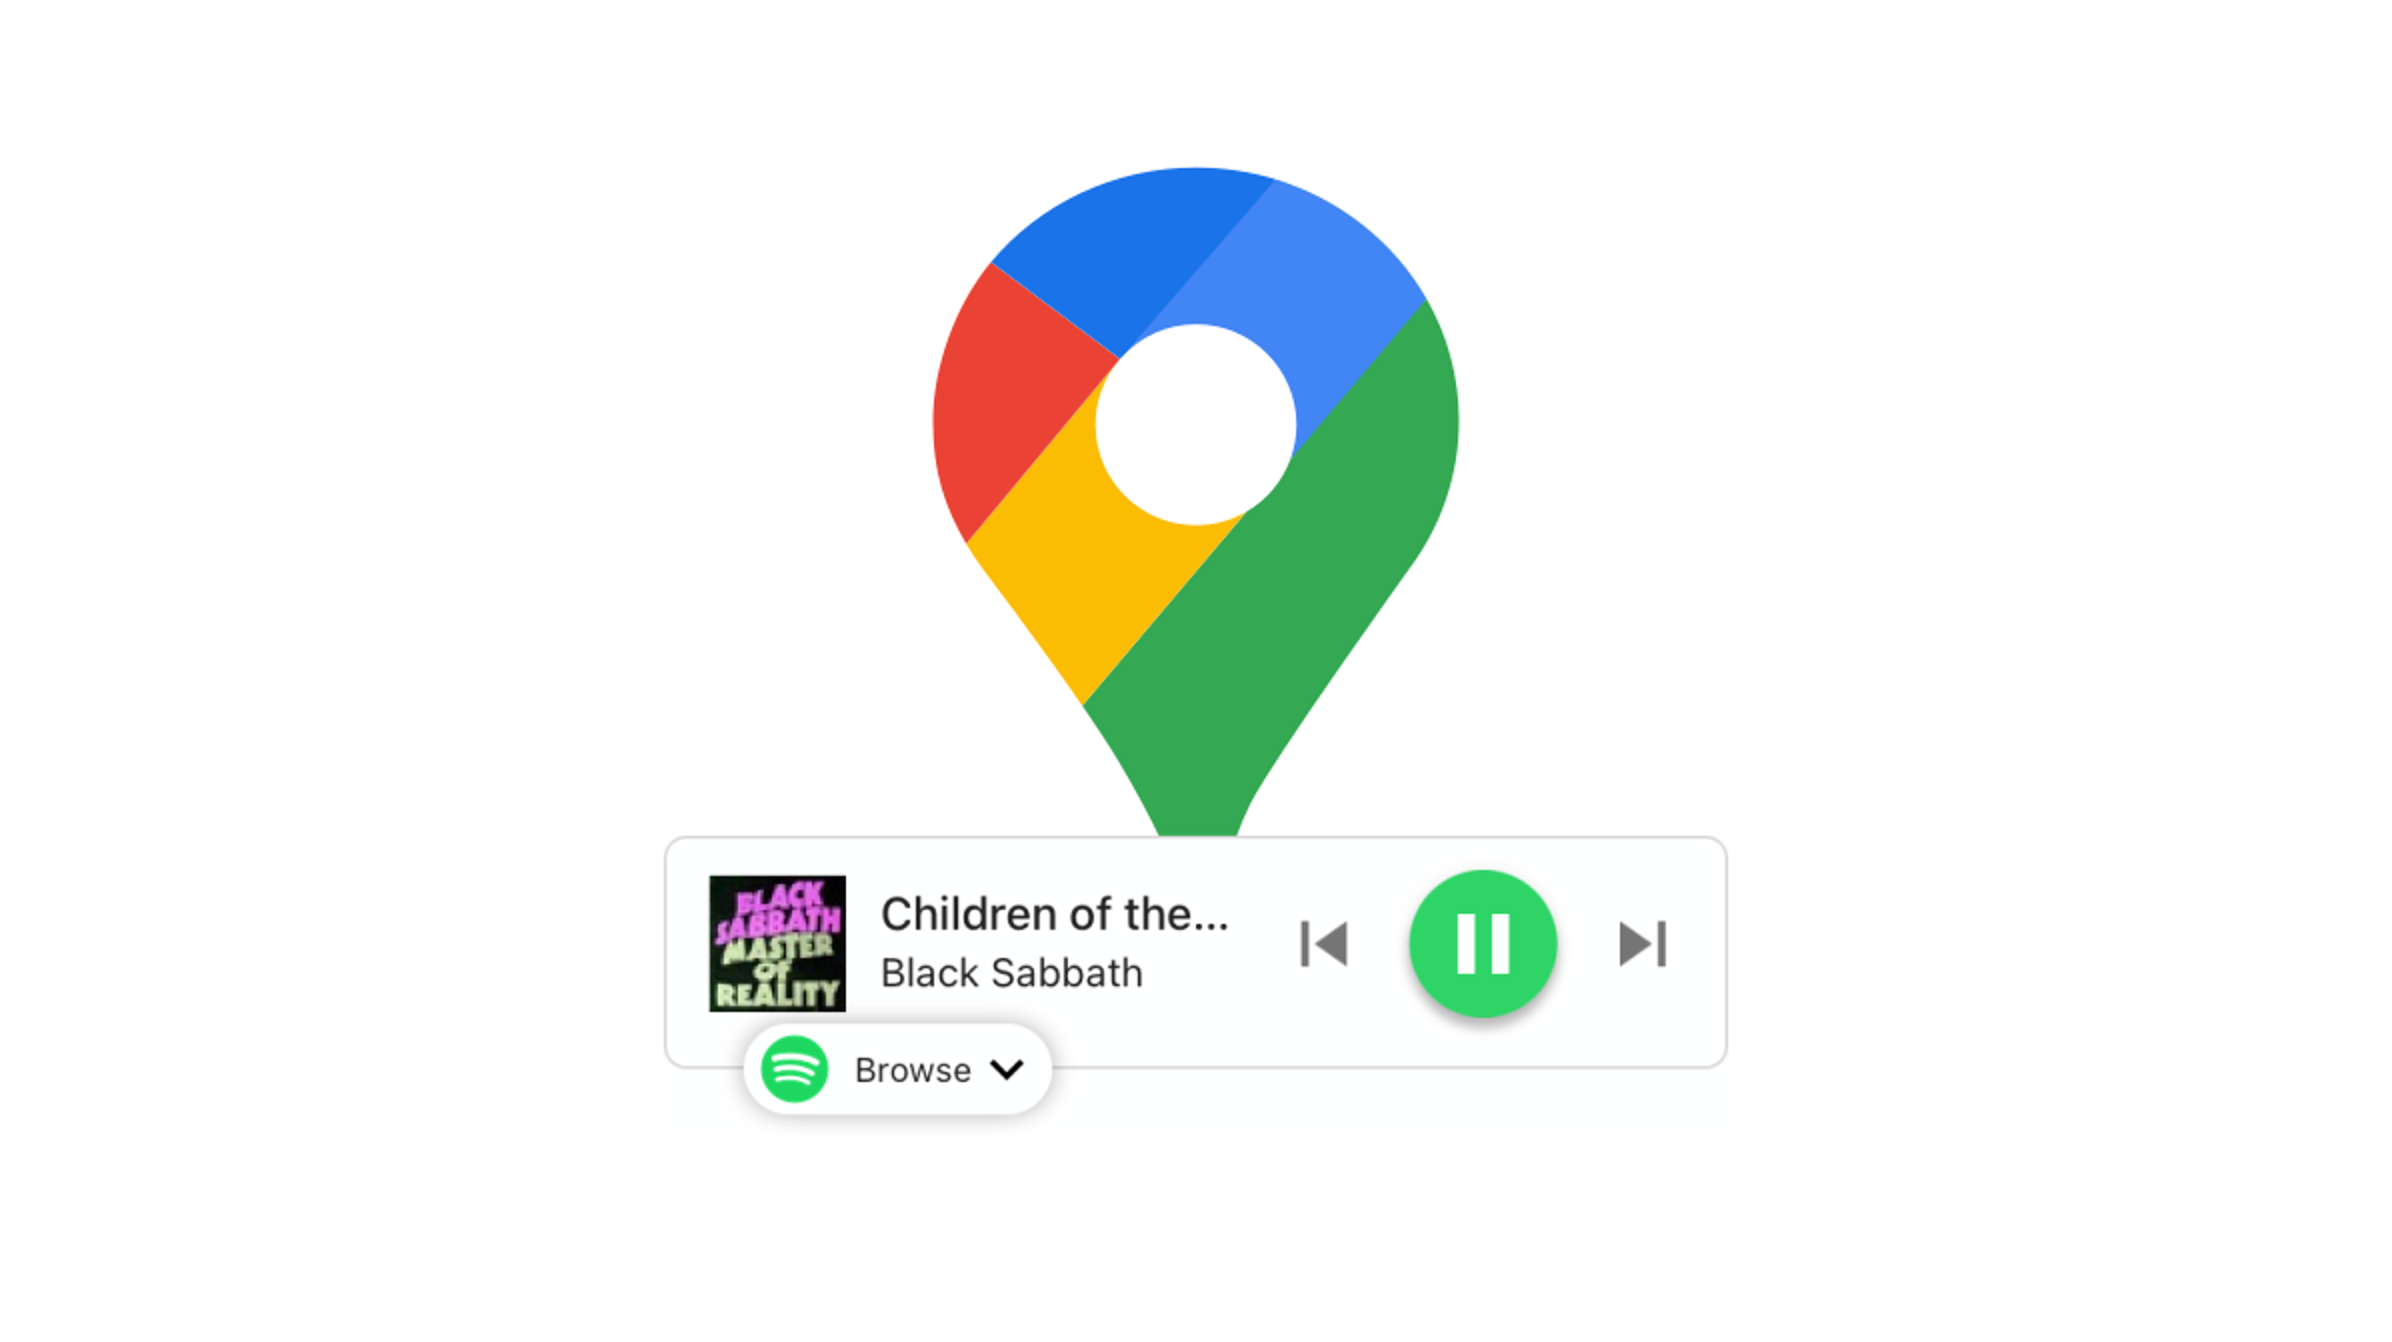 Music Controls in Google Maps